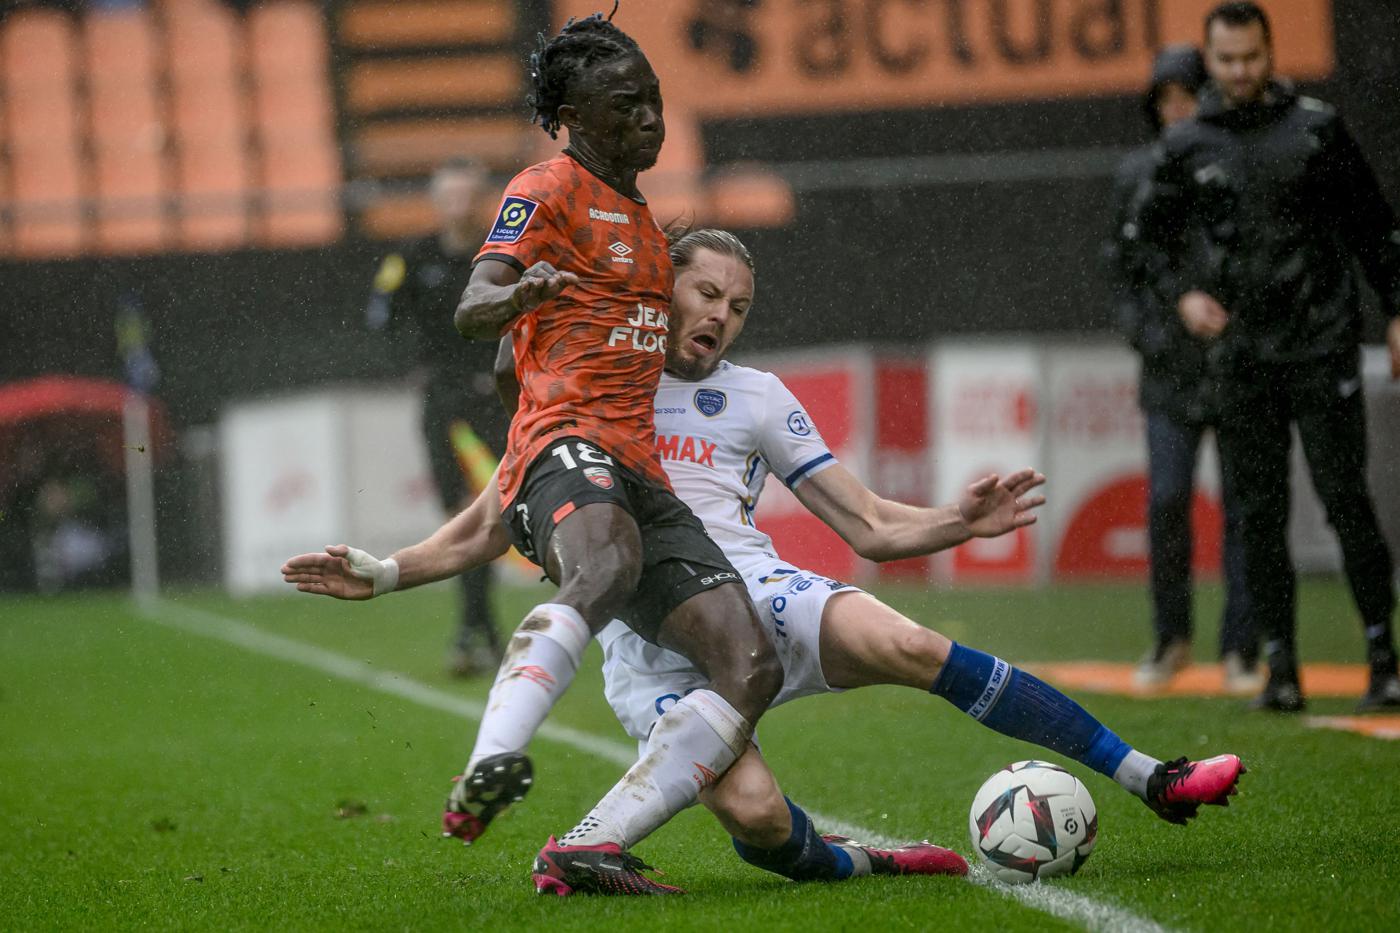 Lorient - Troyes - 2-0. French Championship, round 27. Match review, statistics